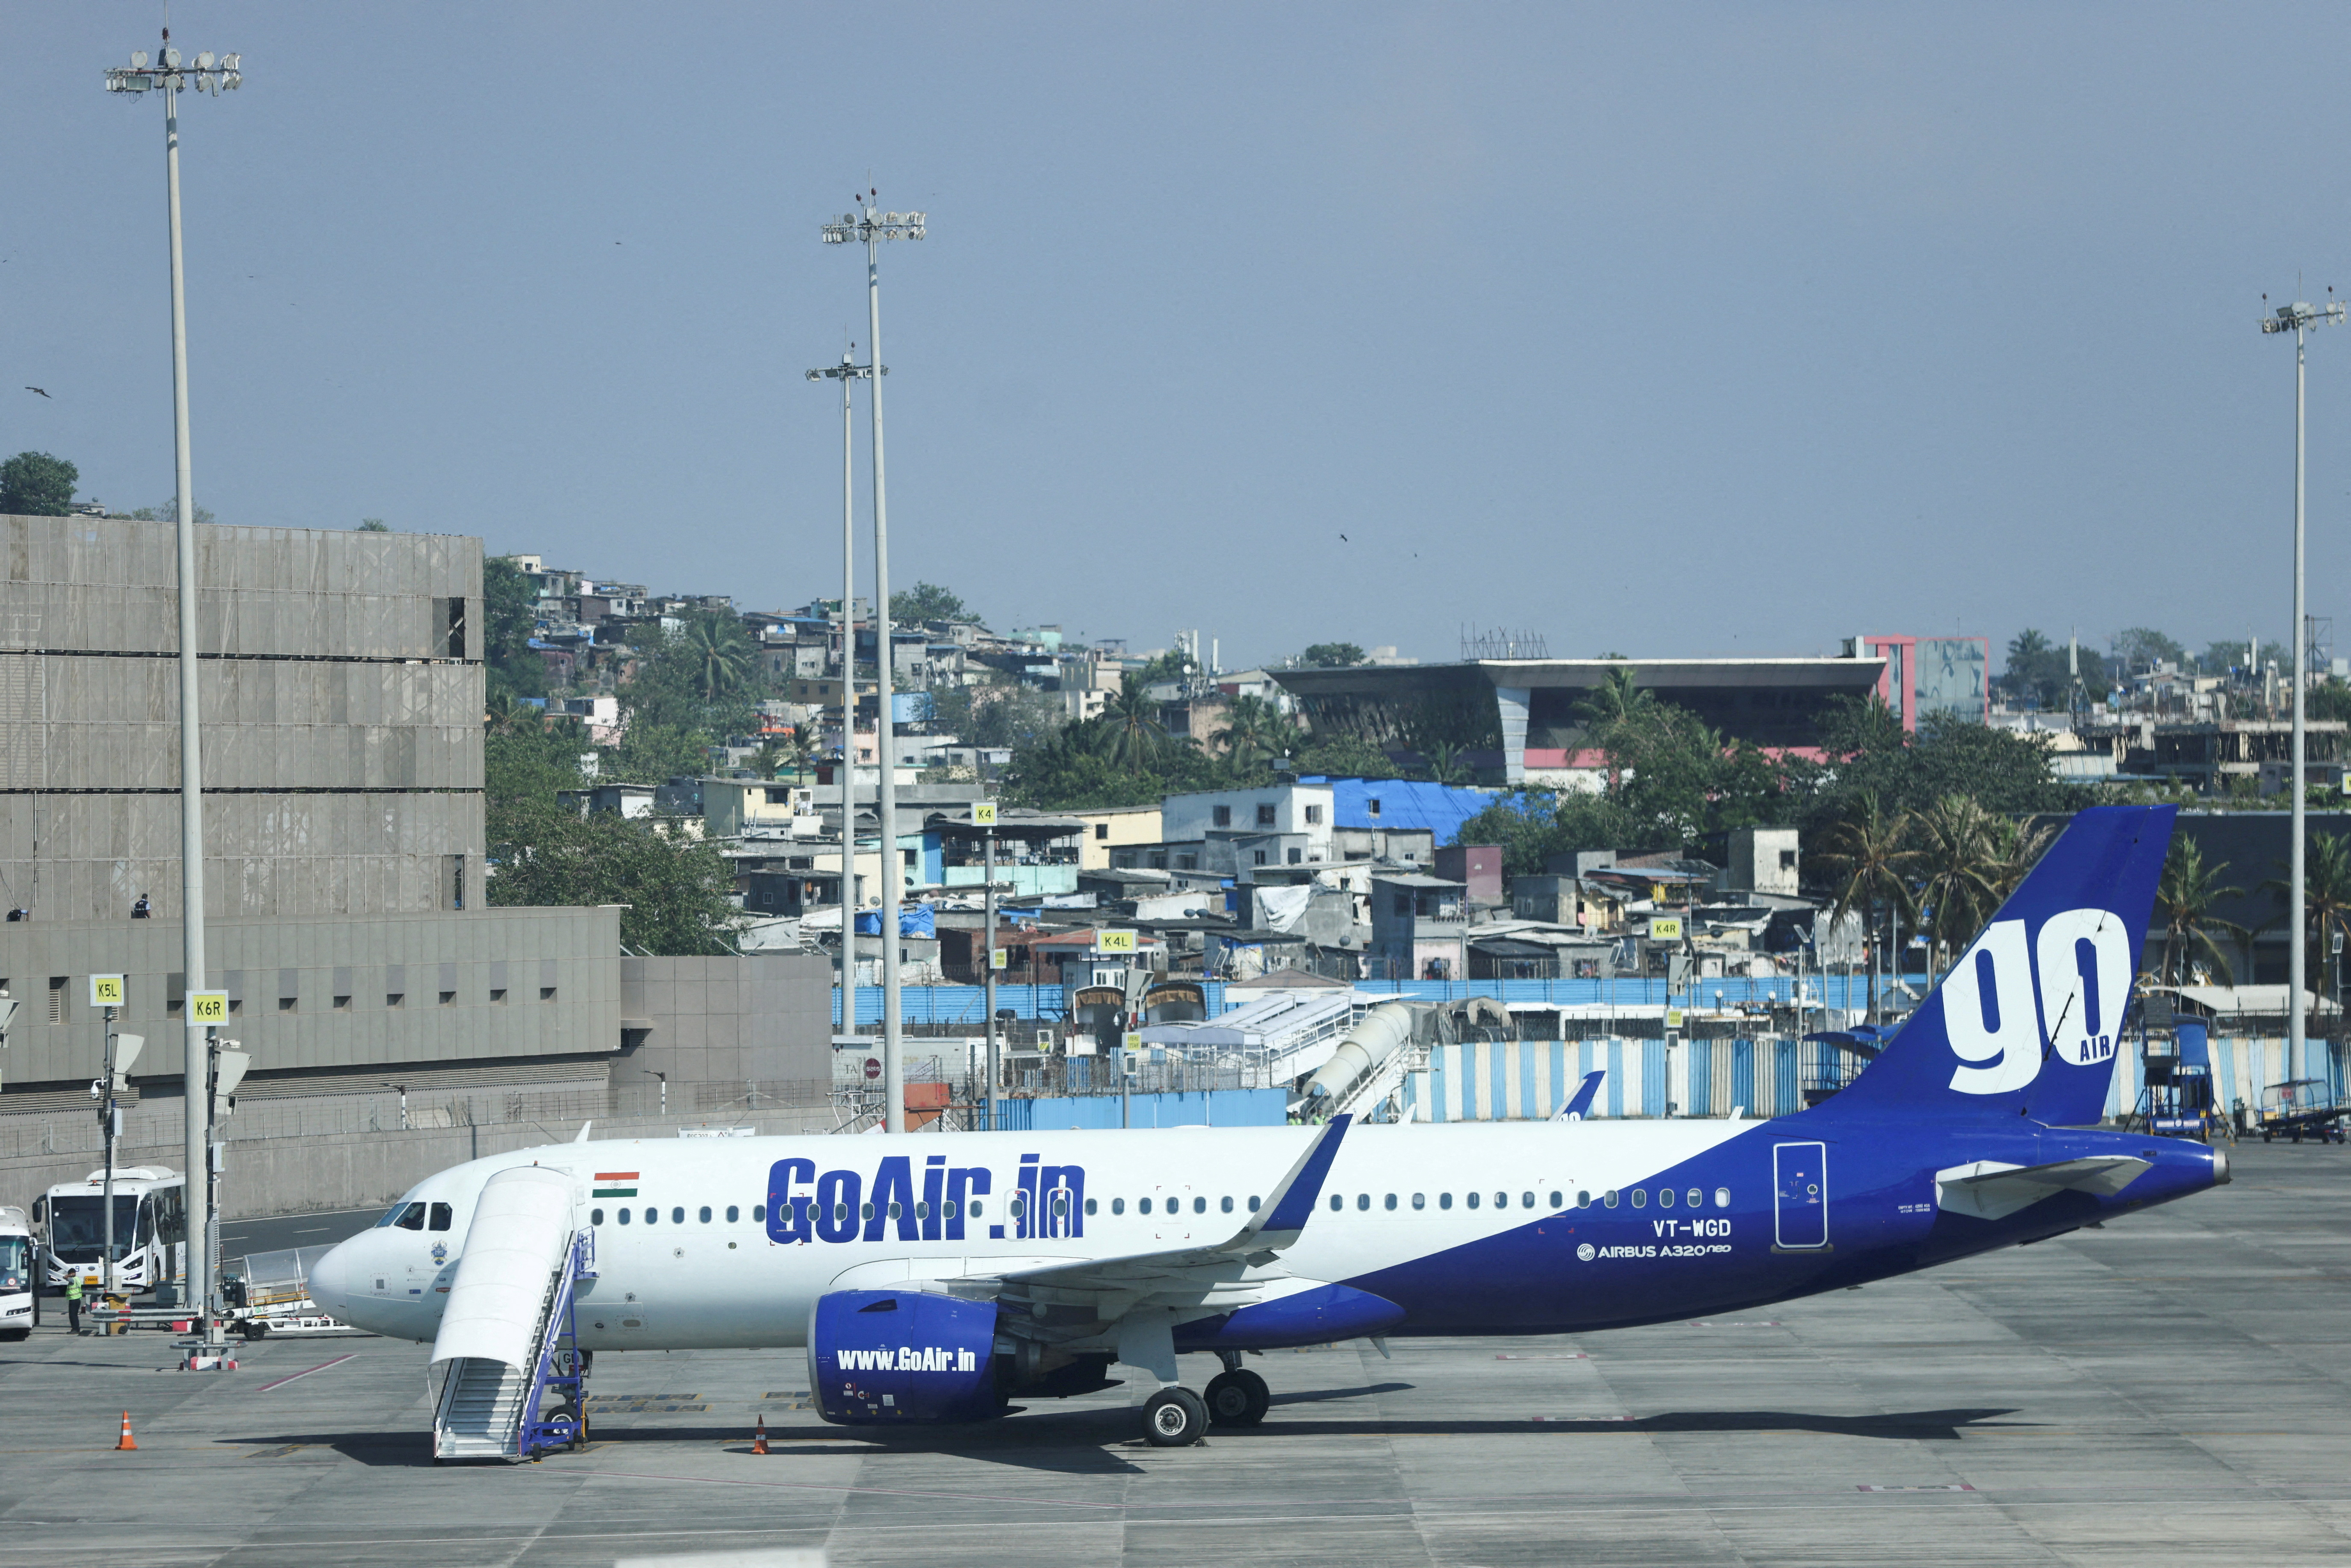 A Go First airline, formerly known as GoAir, passenger aircraft is parked at the Chhatrapati Shivaji International Airport in Mumbai,